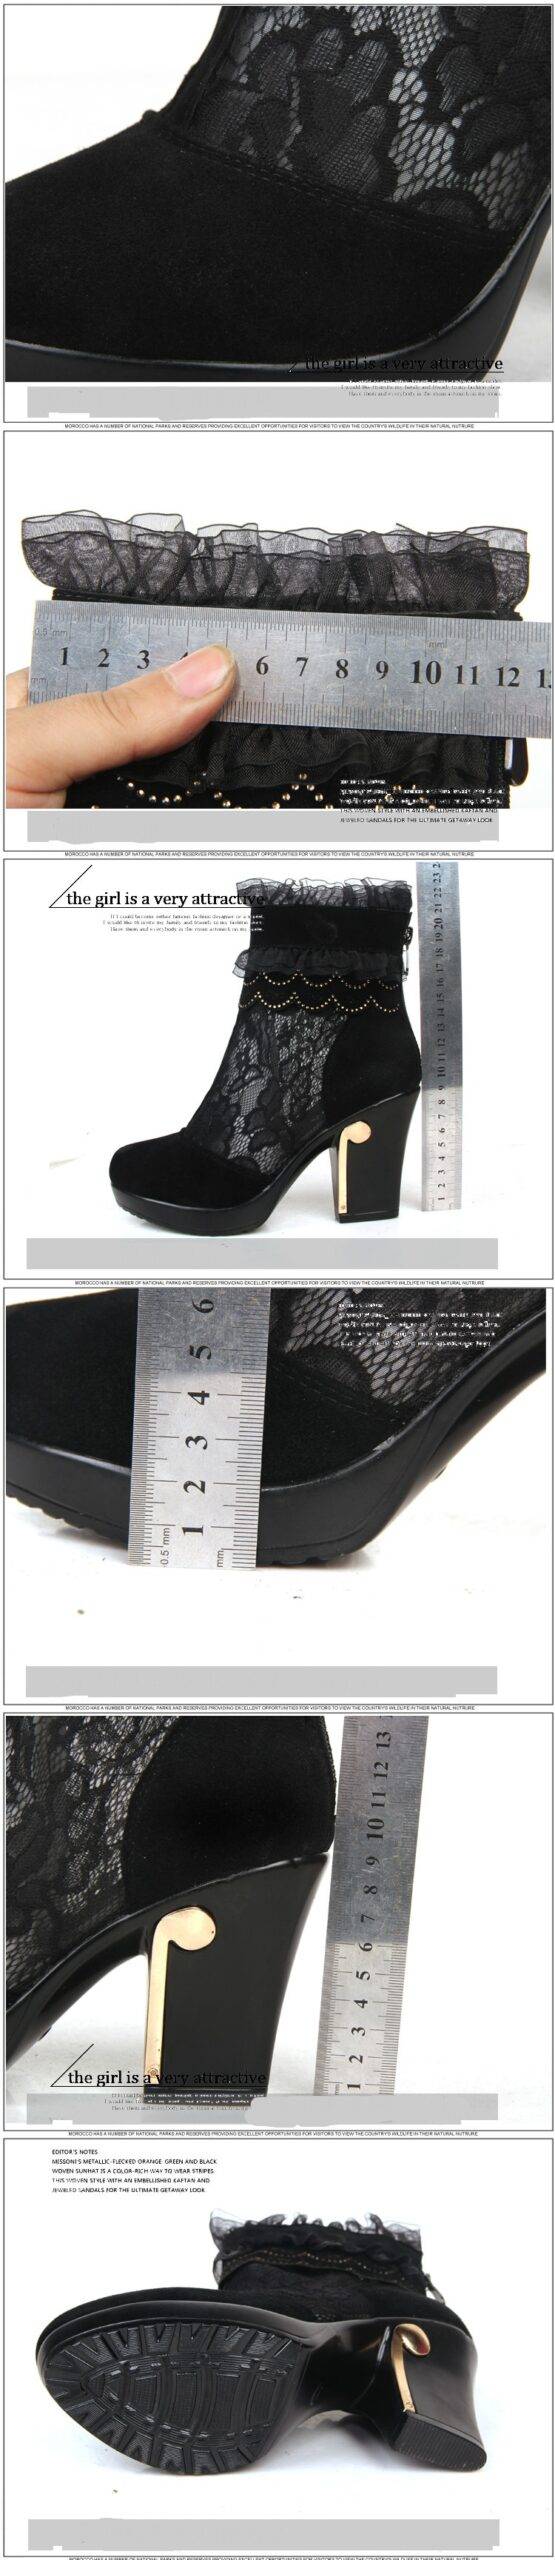 Genuine Leather High-Heeled Lace Ankle Boots in Women's Boots